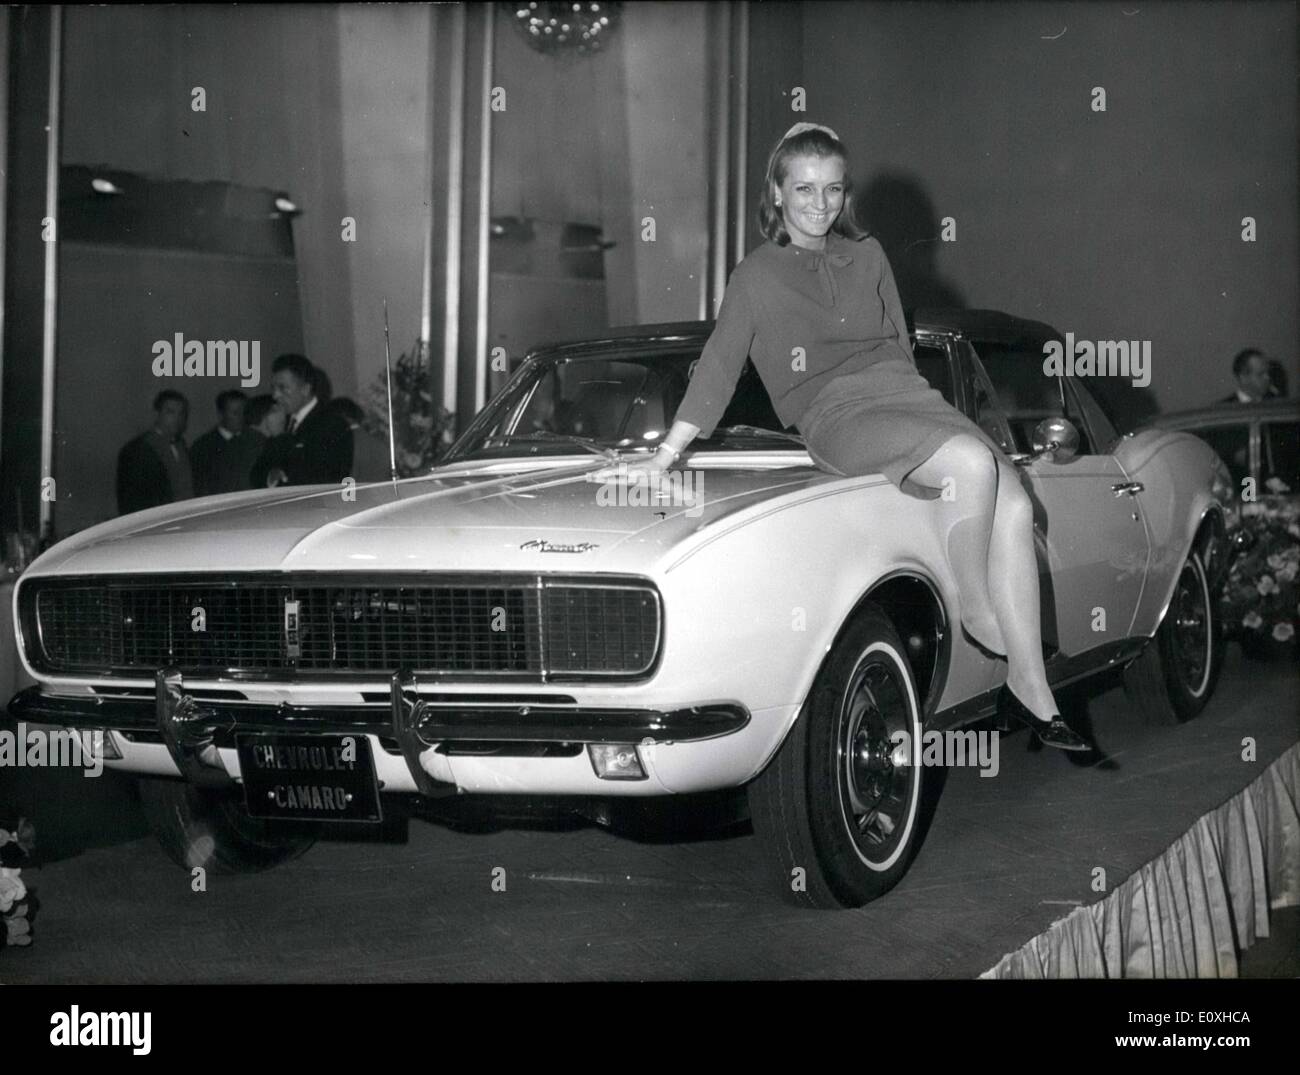 Oct. 10, 1966 - Motor Show To Open October 6th The annual Motor Show will open at the Porte de Versailles, Paris, October 6th. OPS: A Camaro Chevrolet (General Motors) on show at Hilton Hotel, Paris. Stock Photo